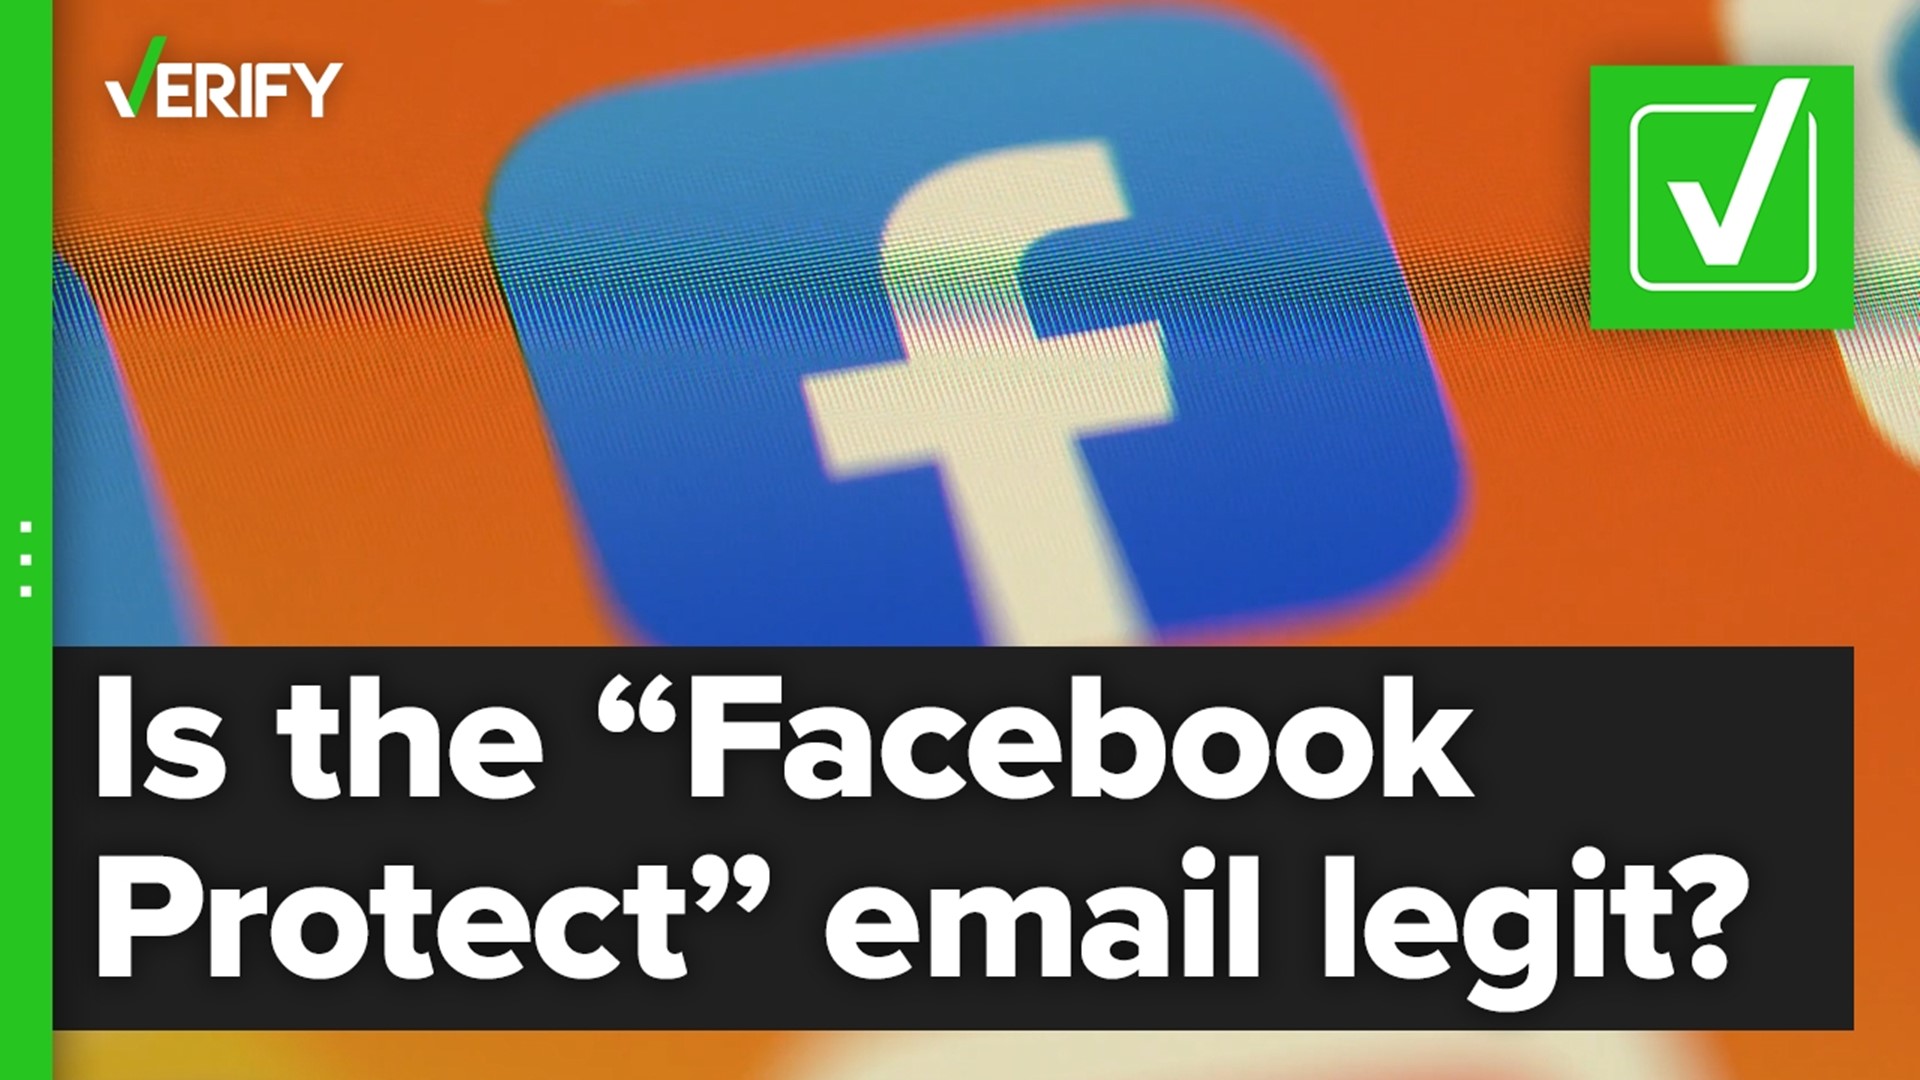 Is this email about “Facebook Protect” legit? The VERIFY team confirms this is true.